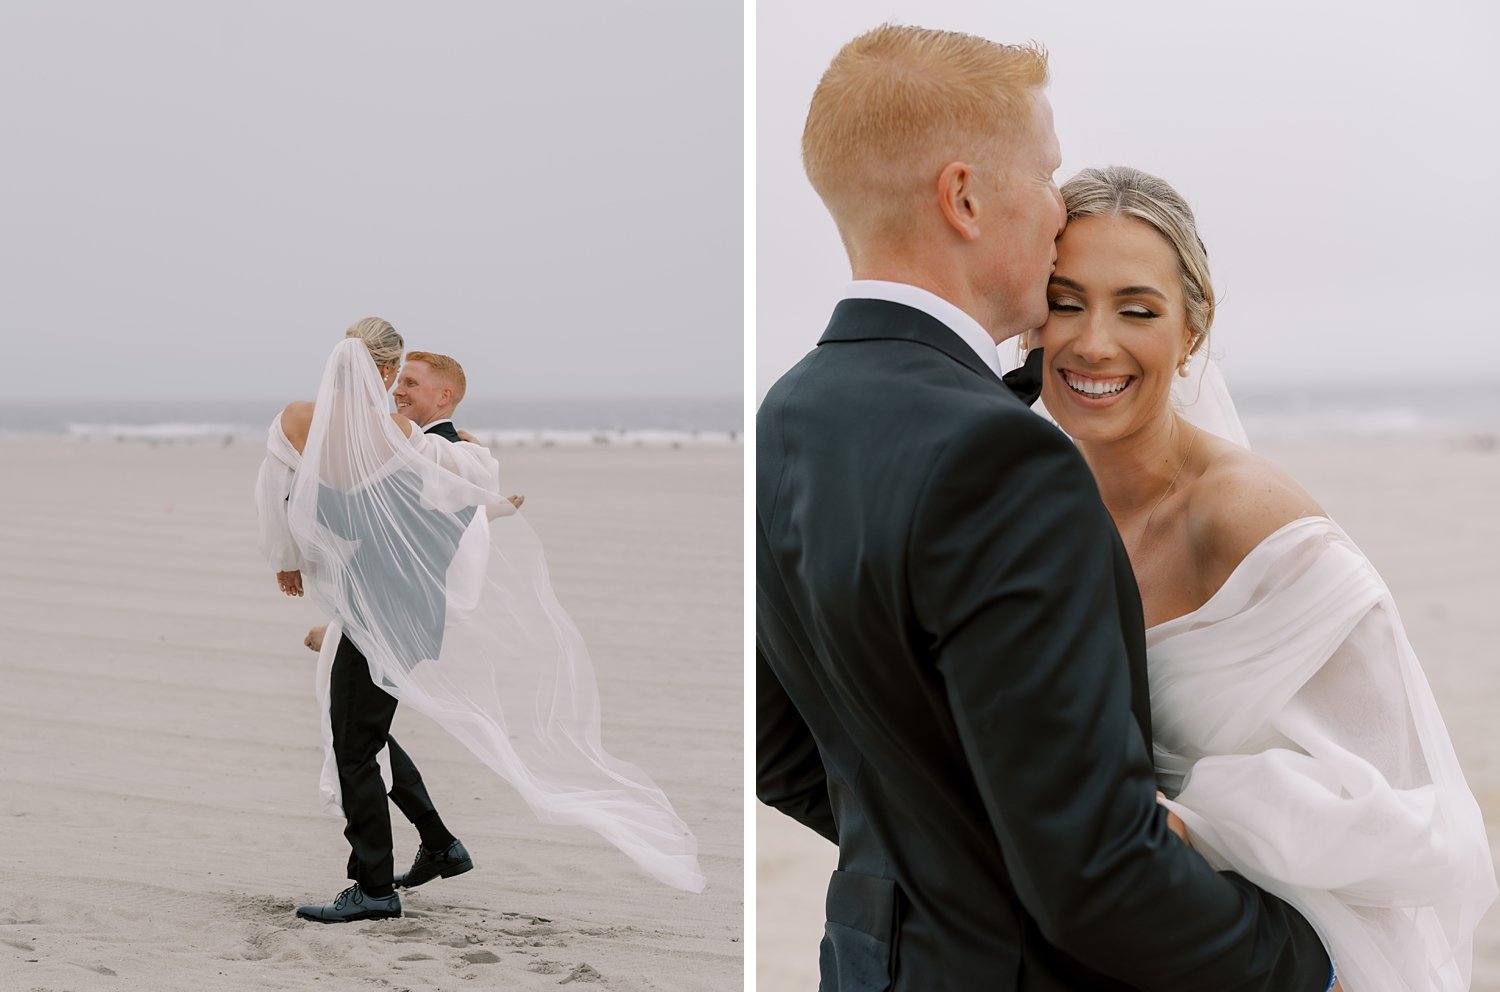 groom picks up bride carrying her on beach during portraits